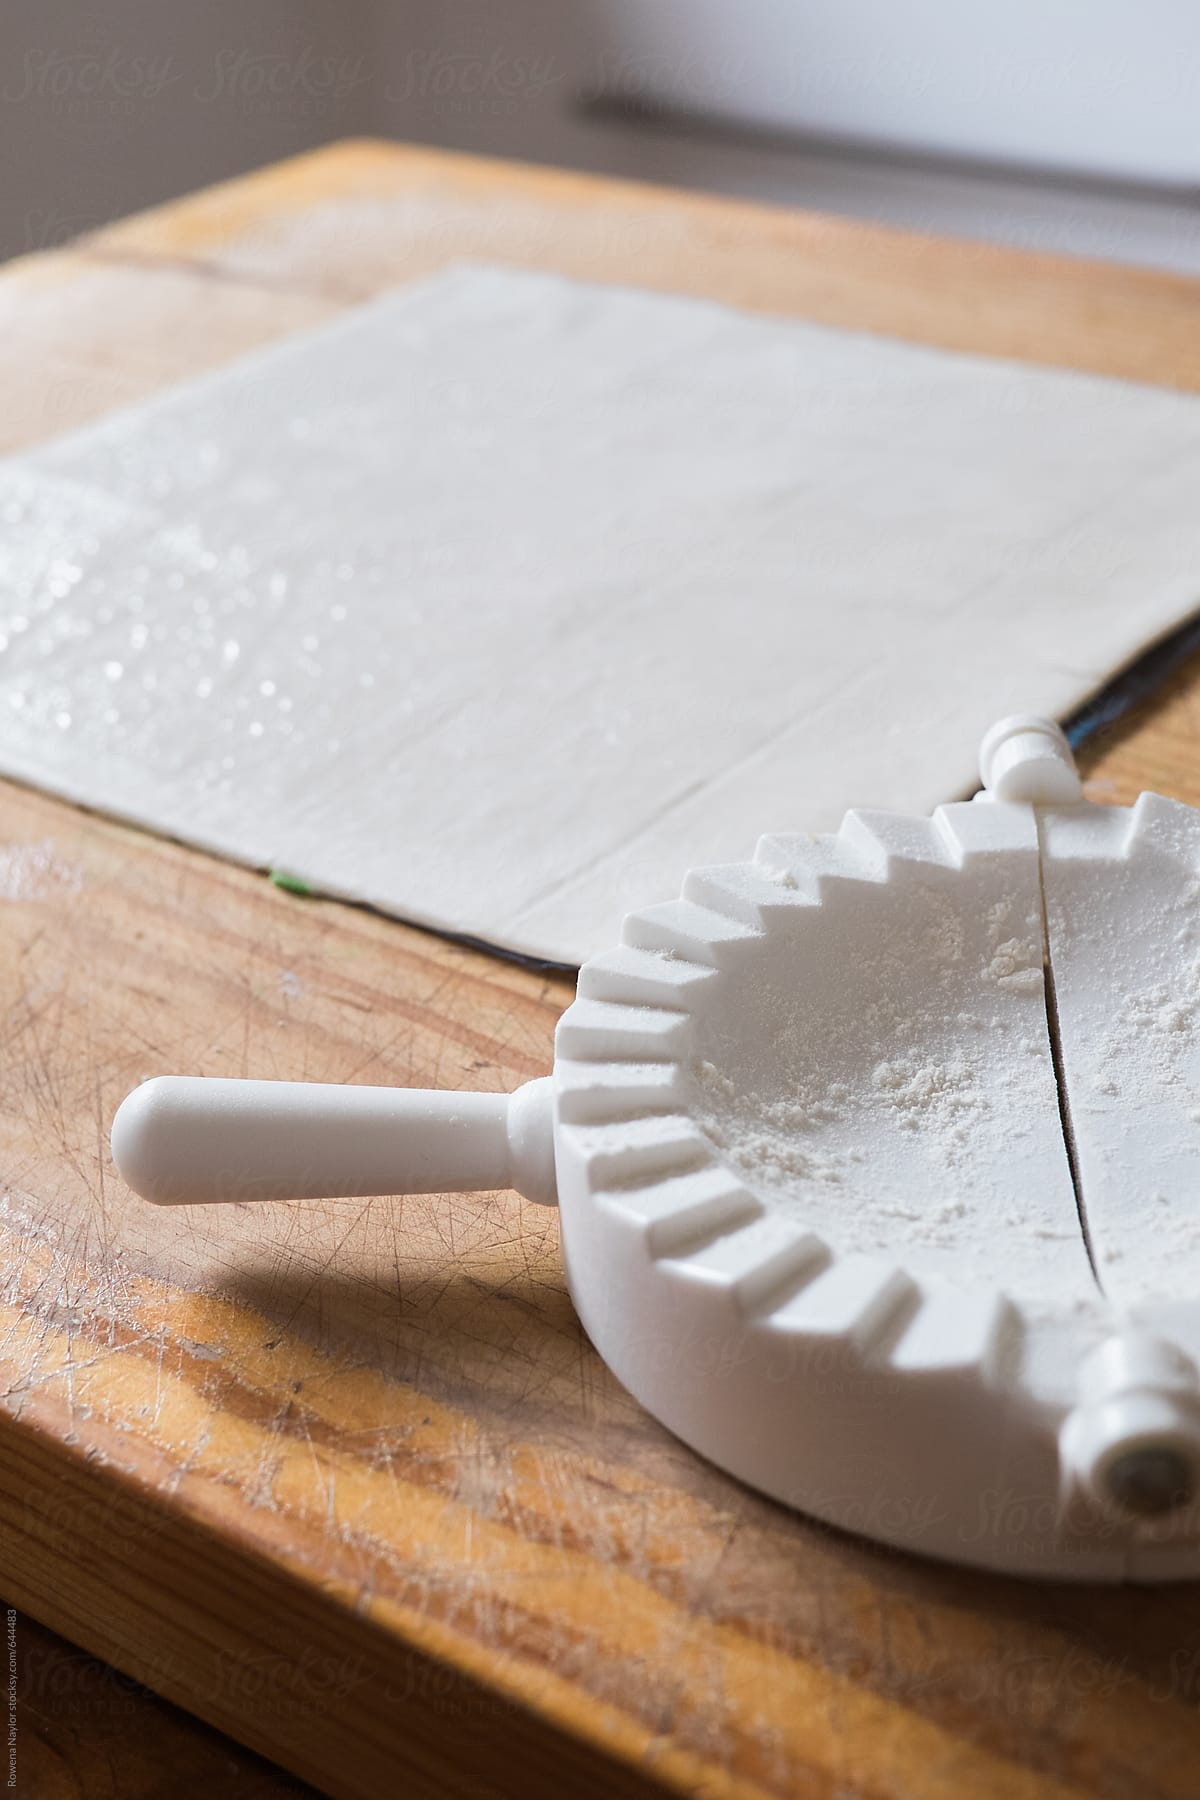 Empanada cutter and raw pastry sheet